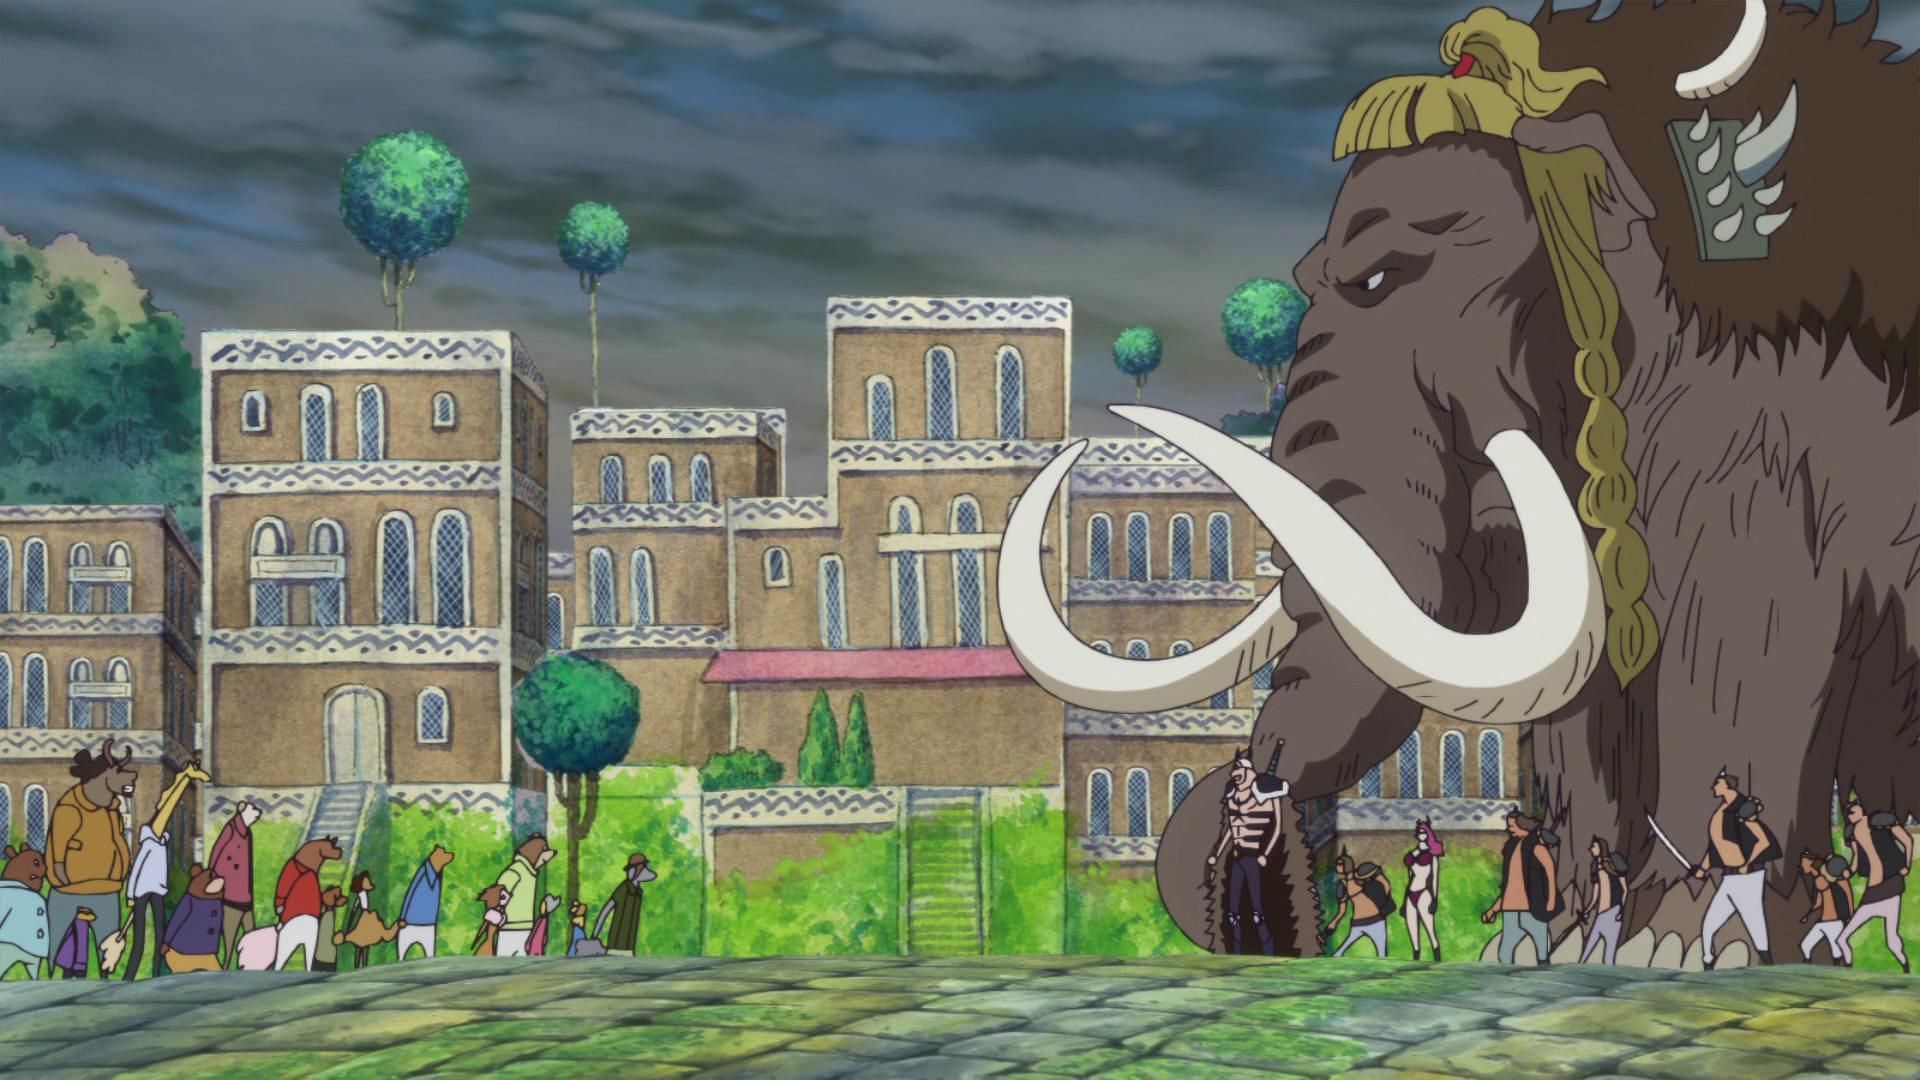 The battle between Jack and the Minks lasted five days (Image via Toei Animation, One Piece)